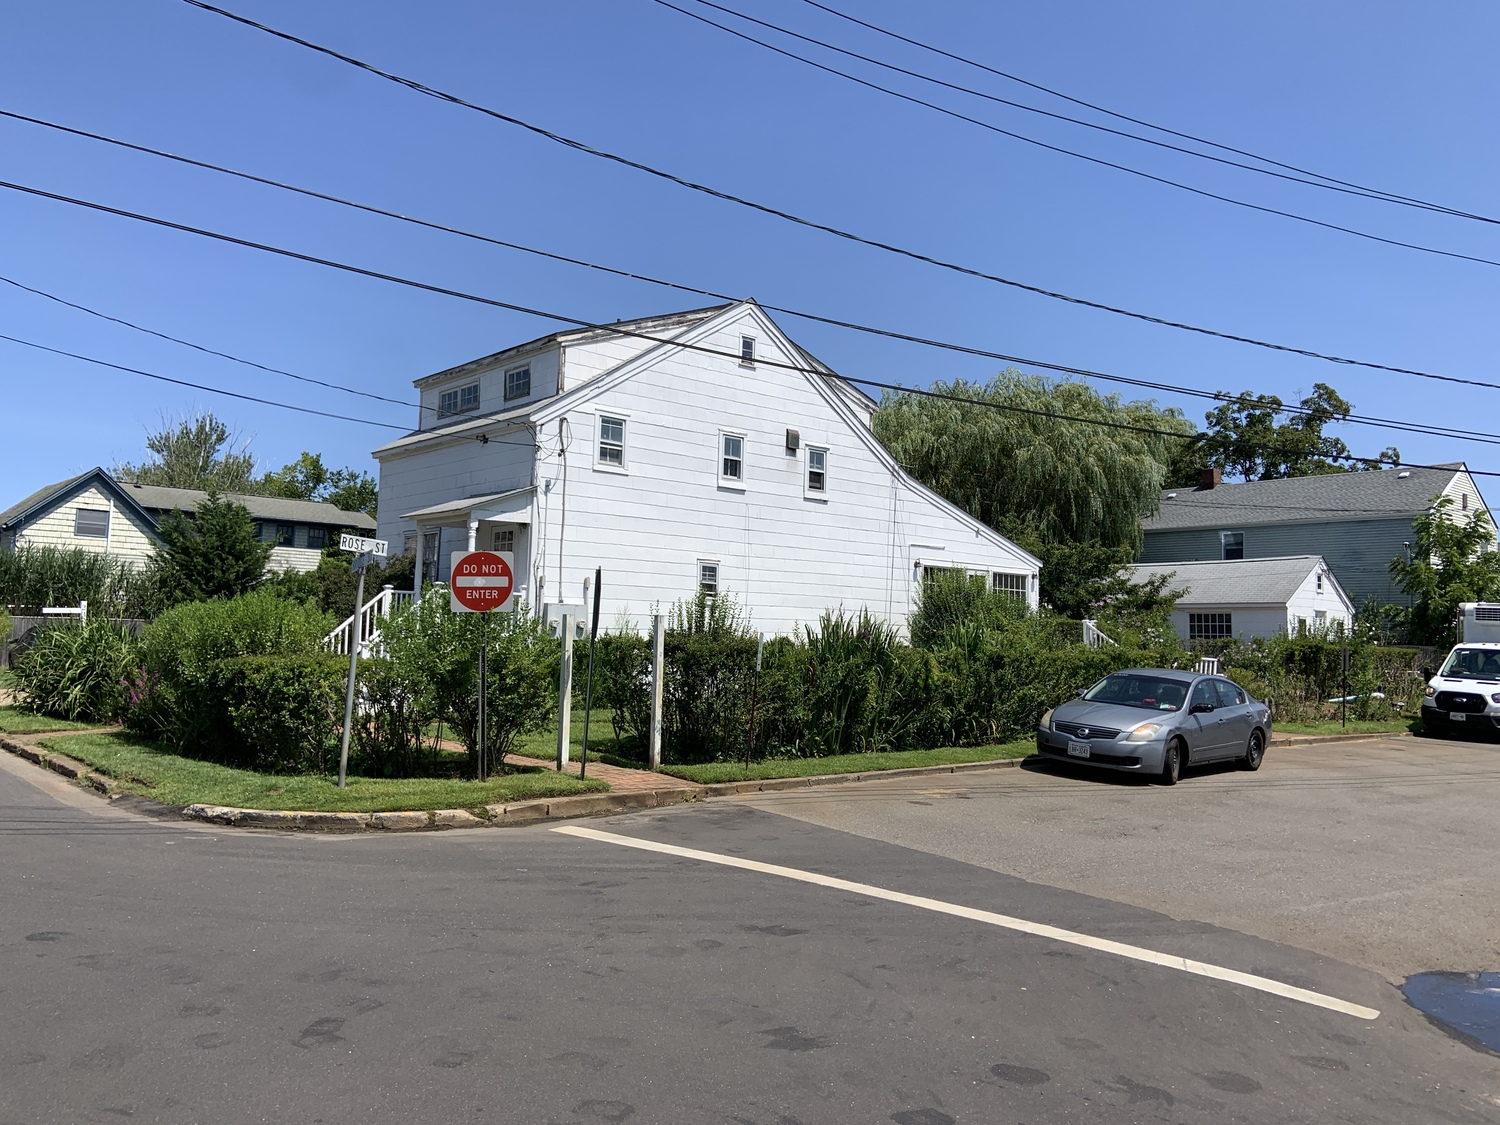 Developer Adam Potter will unveil a new proposal for the 1.4 acres of property he owns between Bridge and Rose Streets in Sag Harbor Village. STEPHEN J. KOTZ